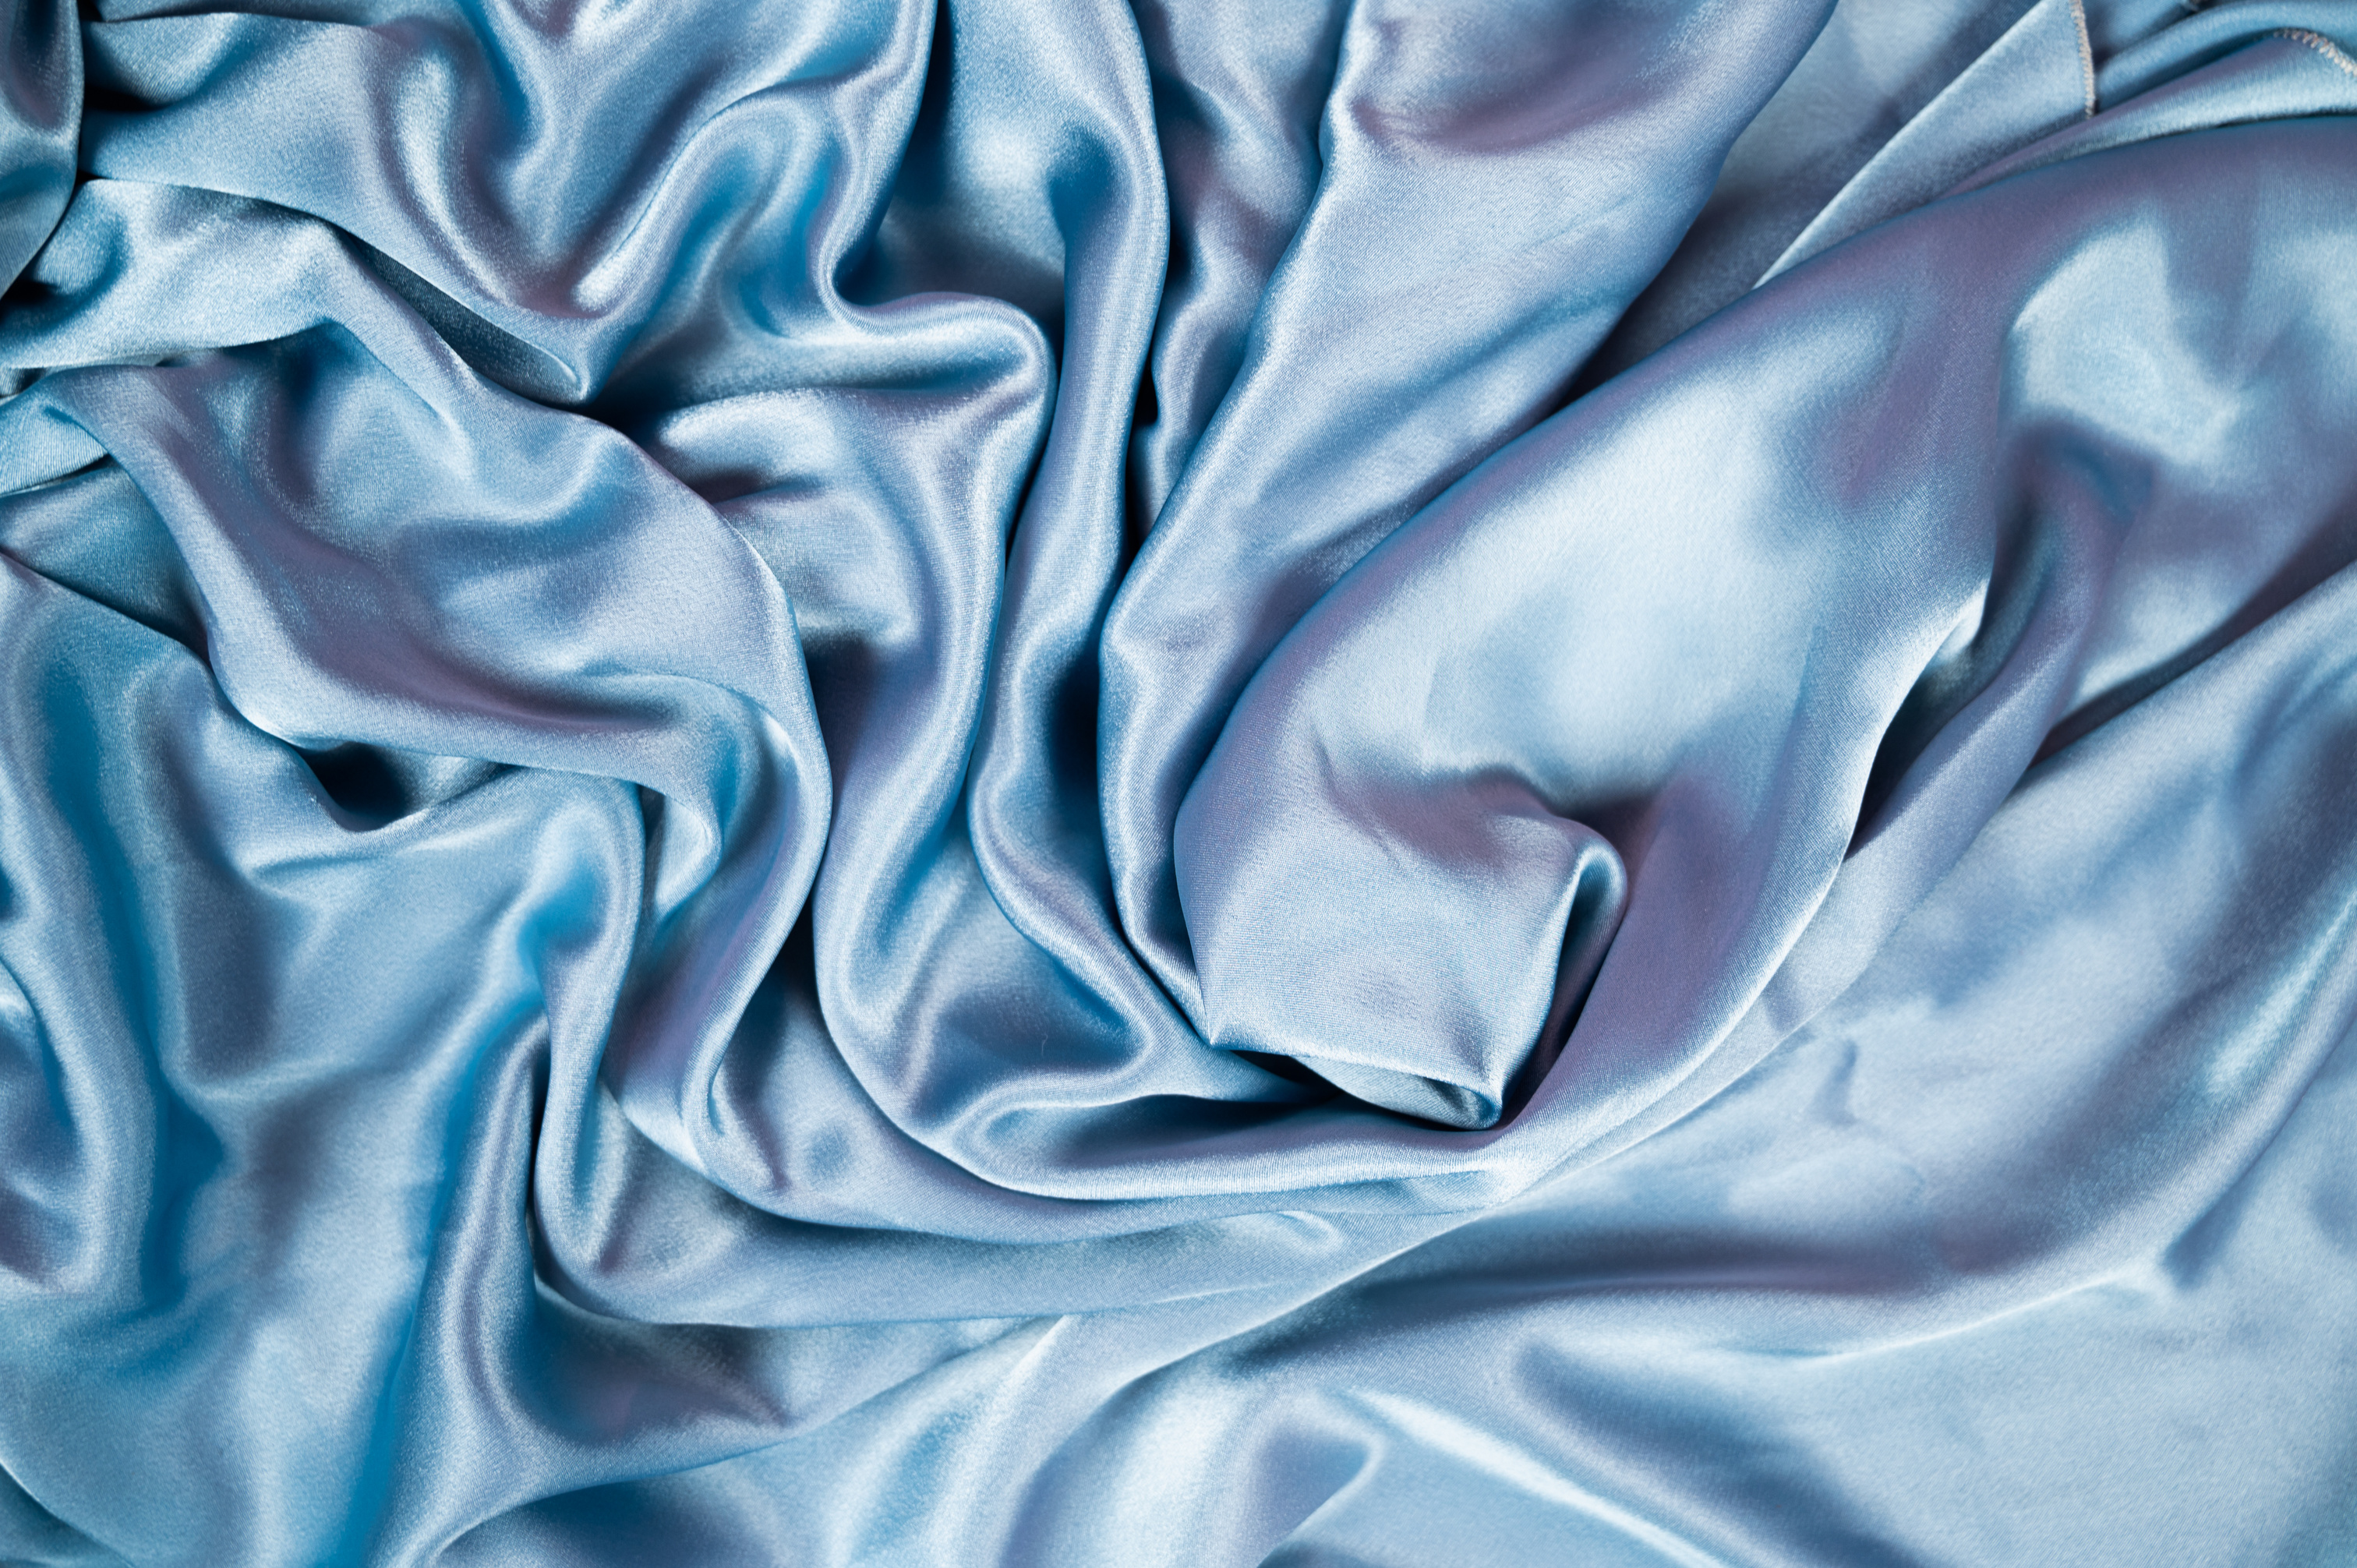 Light blue satin background and texture. Grooved of blue fabric abstract. Top view with empty space.